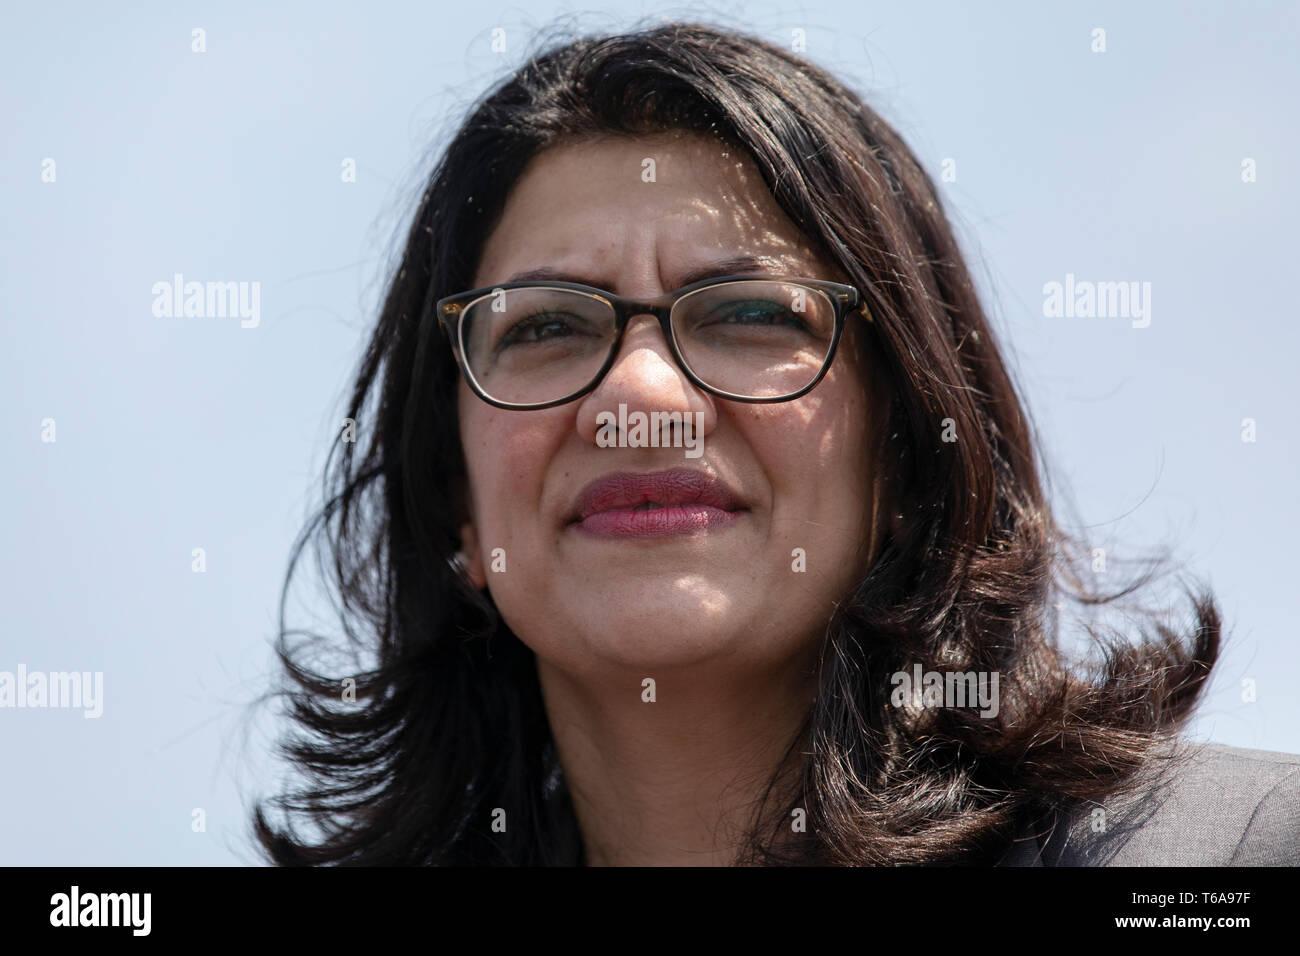 United States Representative Rashida Tlaib, Democrat of Michigan, speaks during a press event in front of the United States Capitol in Washington, DC on April 30, 2019. Several members of Congress attended the event and spoke out against recent tweets by President Donald Trump that attacked Rep. Ilhan Omar. Credit: Alex Edelman/CNP/MediaPunch Stock Photo